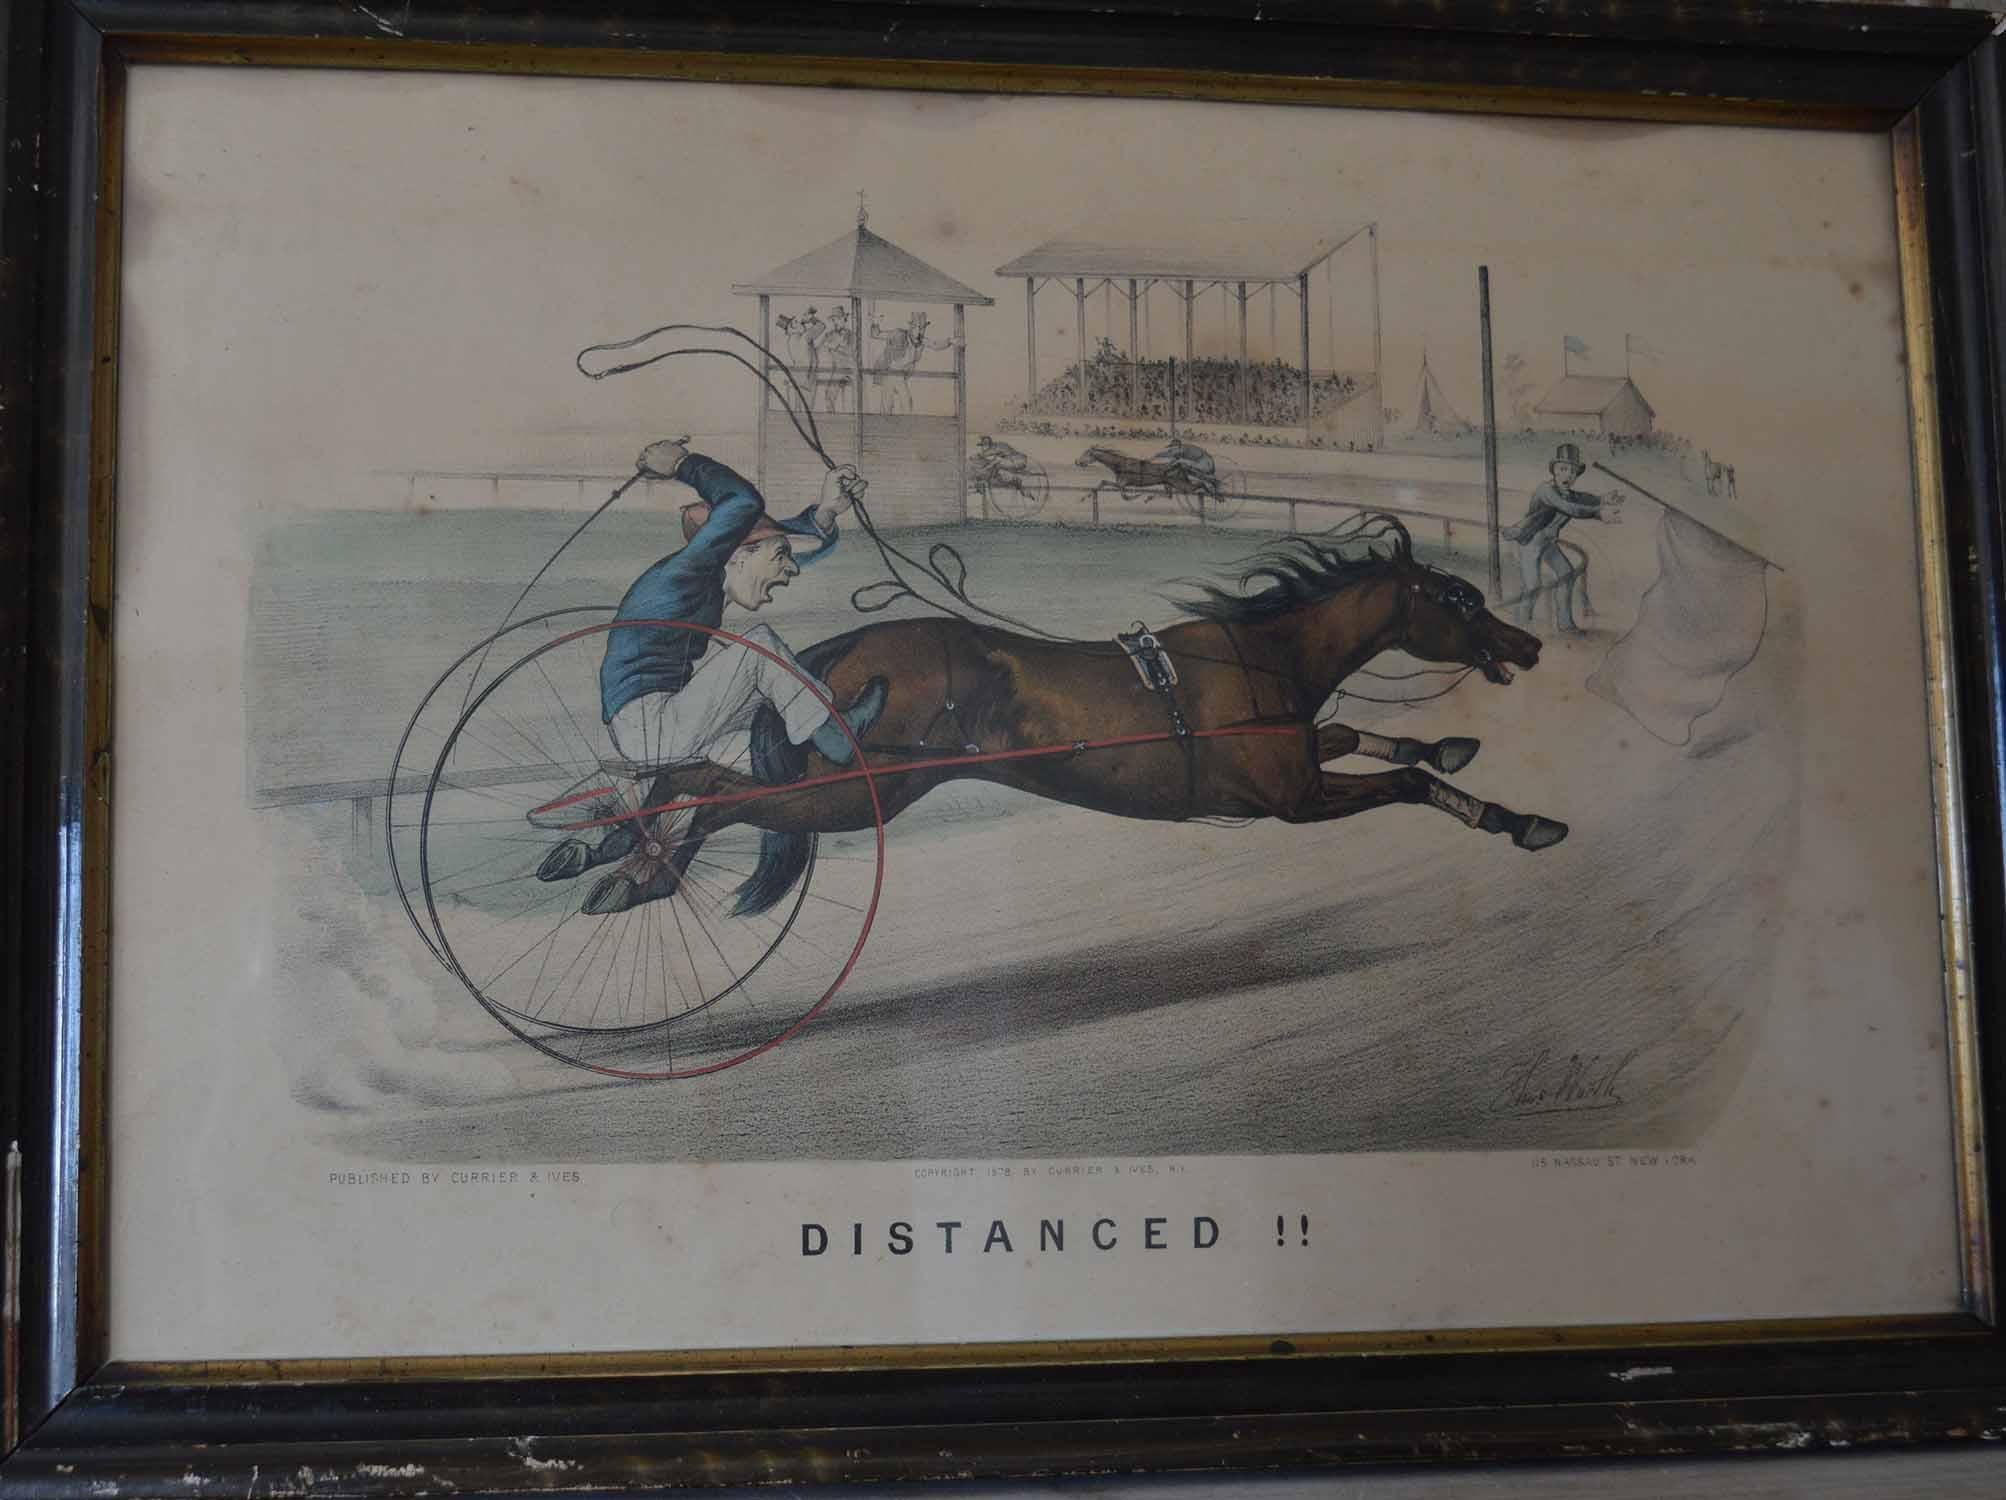 An original Currier and Ives print of a caricature of harness racing.

Titled- Distanced. Signed Thomas Worth lower right.

Hand colored lithograph. Published by Currier and Ives, New York, dated 1878.

Original lacquered gesso and gilt frame